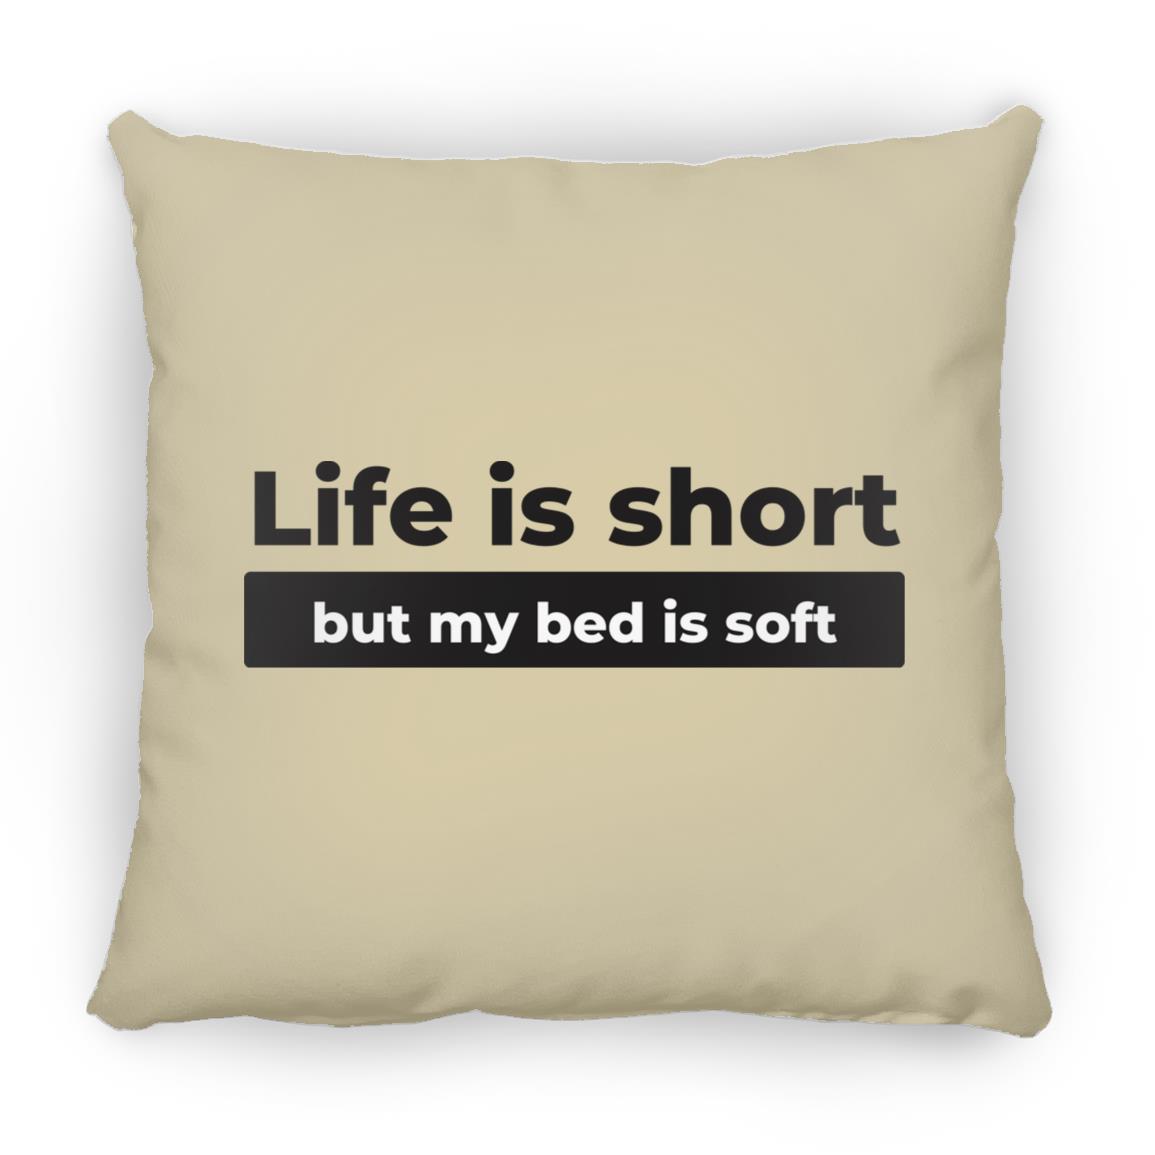 Life Is Short But My Bed Is Soft Small Square Pillow